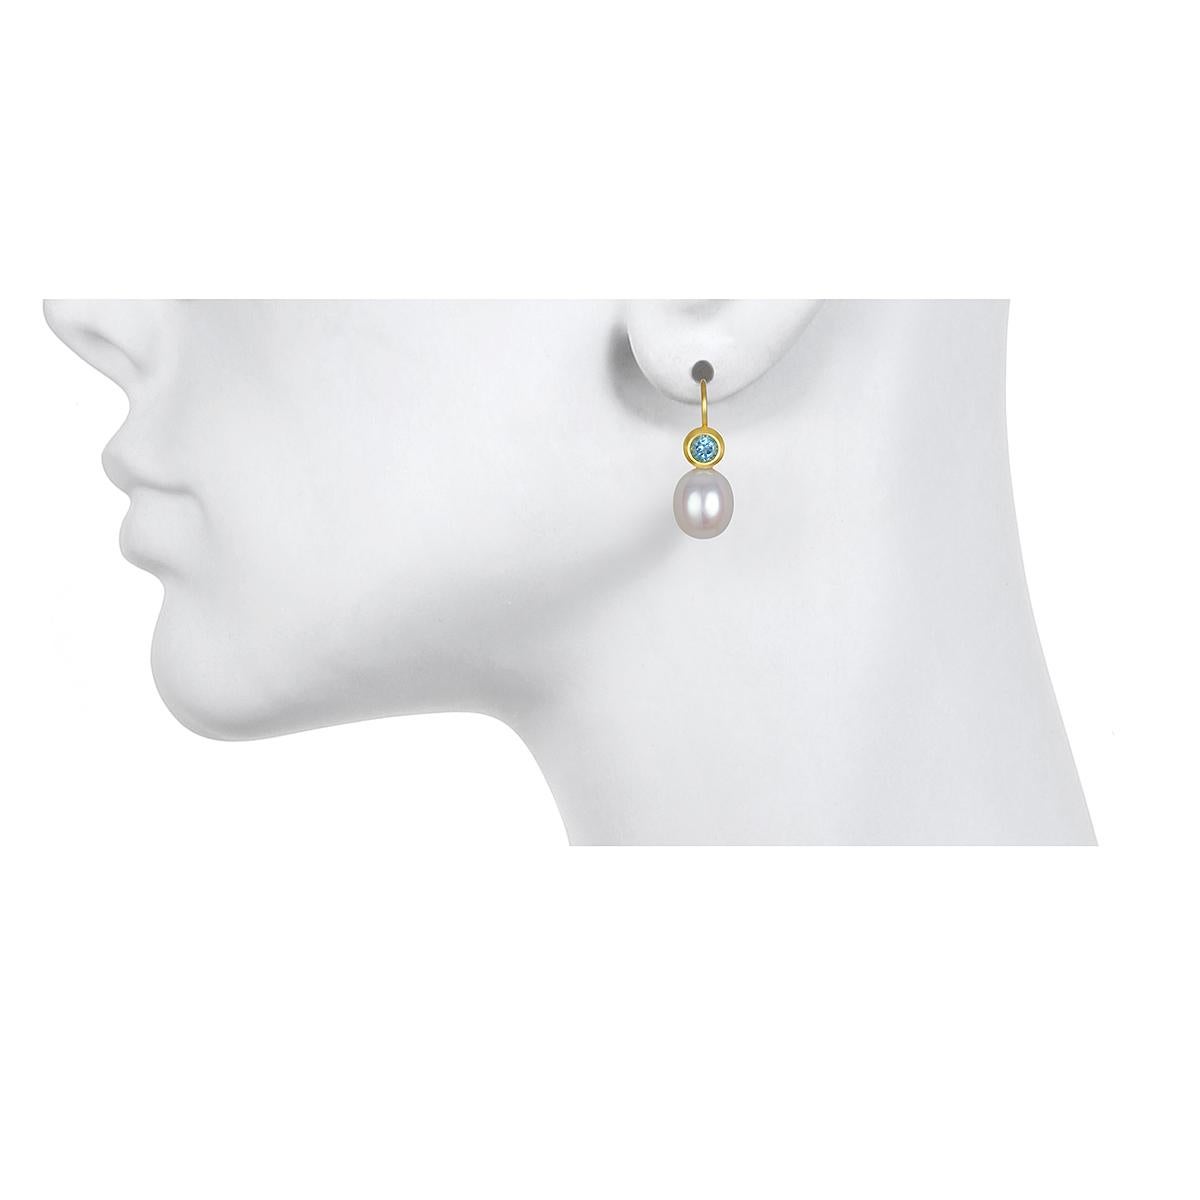 Set in 18k green gold,  beautiful blue Aquamarines are bezel set and paired with lustrous white freshwater pearls to create a pair of modern-day classic drop earrings.  Matte-finished.
Casual or corporate, the clean design is flattering and simply